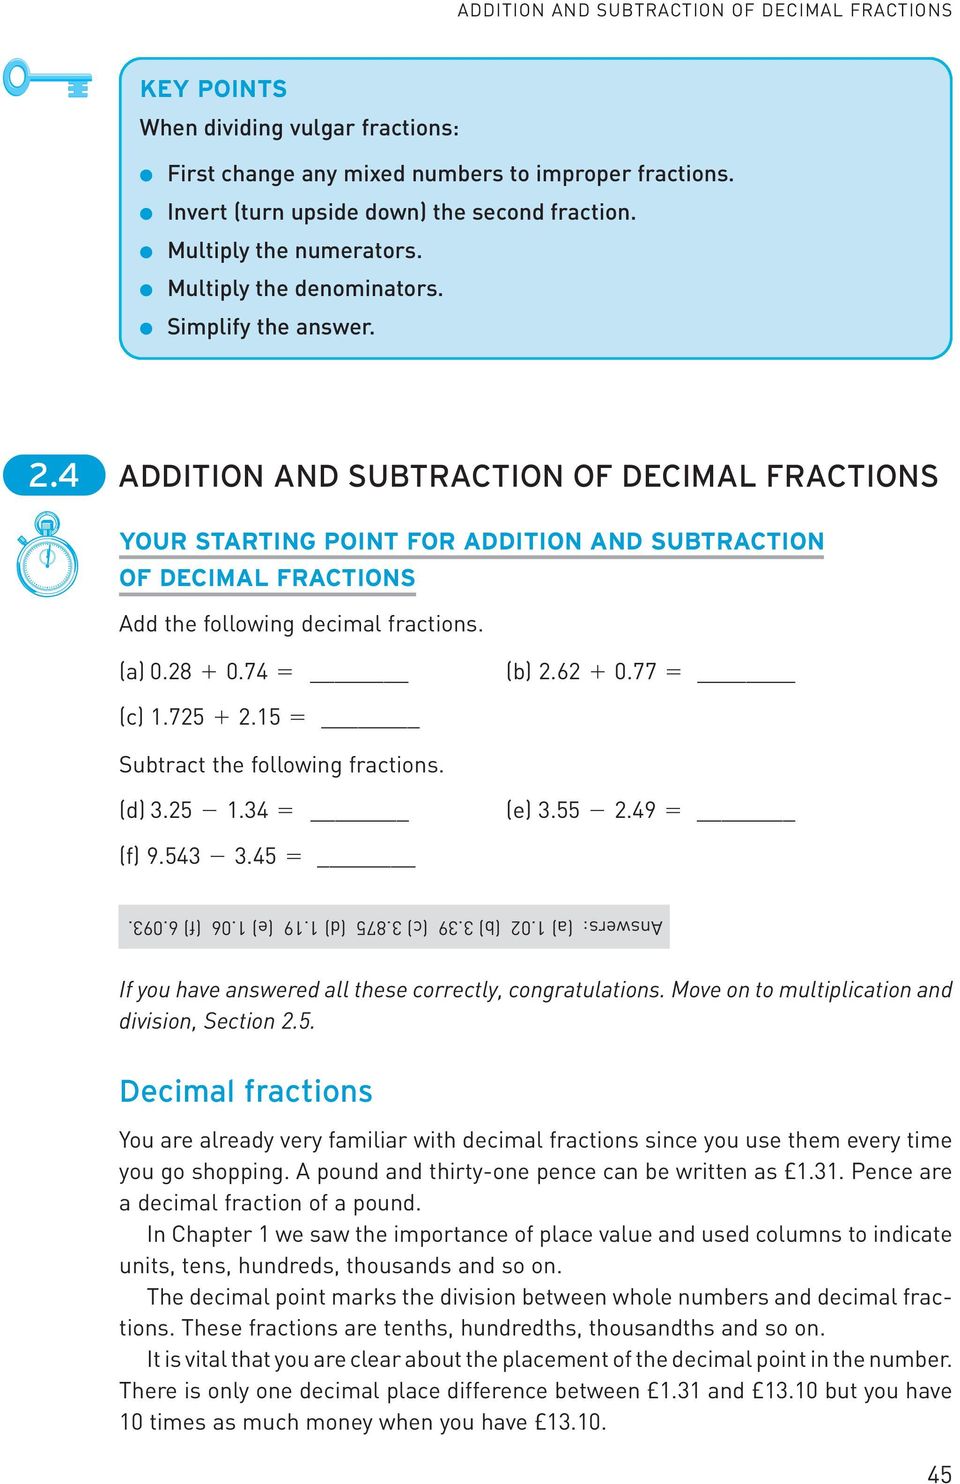 4 ADDITION AND SUBTRACTION OF DECIMAL FRACTIONS YOUR STARTING POINT FOR ADDITION AND SUBTRACTION OF DECIMAL FRACTIONS Add the following decimal fractions. (a) 0.28 + 0.74 = (b) 2.62 + 0.77 = (c).